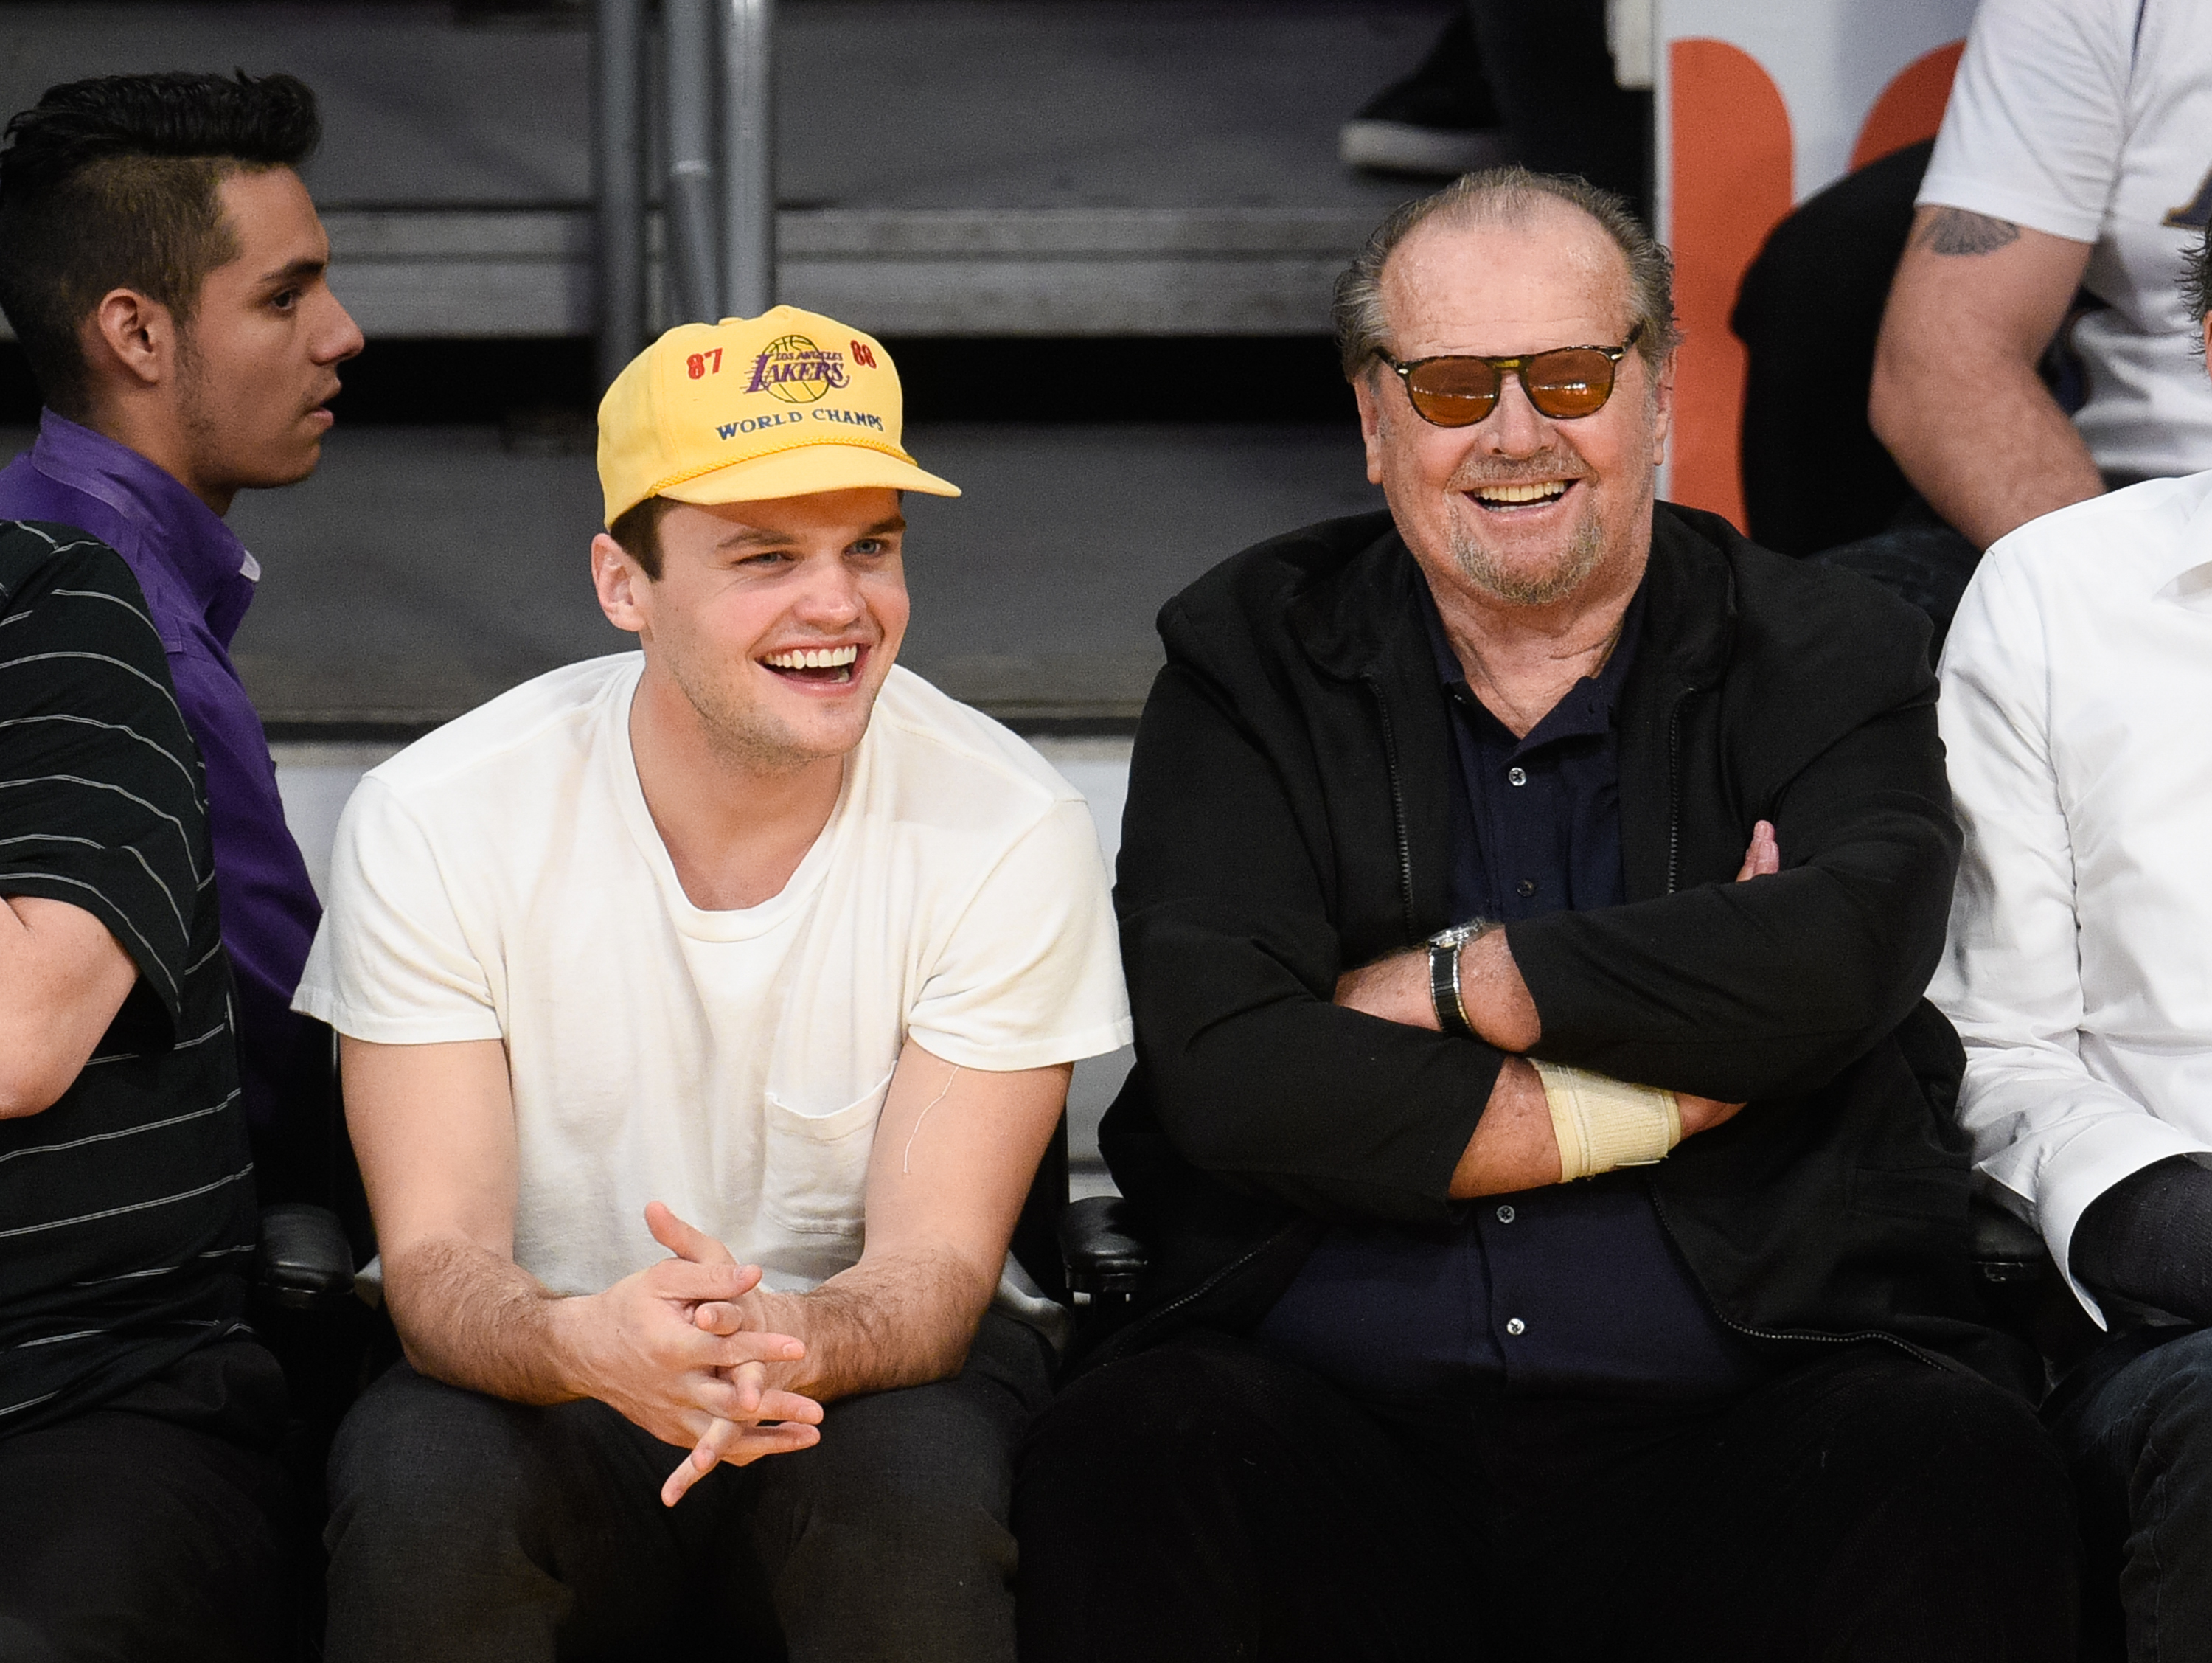 Jack Nicholson and Ray Nicholson at a basketball game between the Golden State Warriors and the Los Angeles Lakers in Los Angeles, California on March 6, 2016 | Source: Getty Images